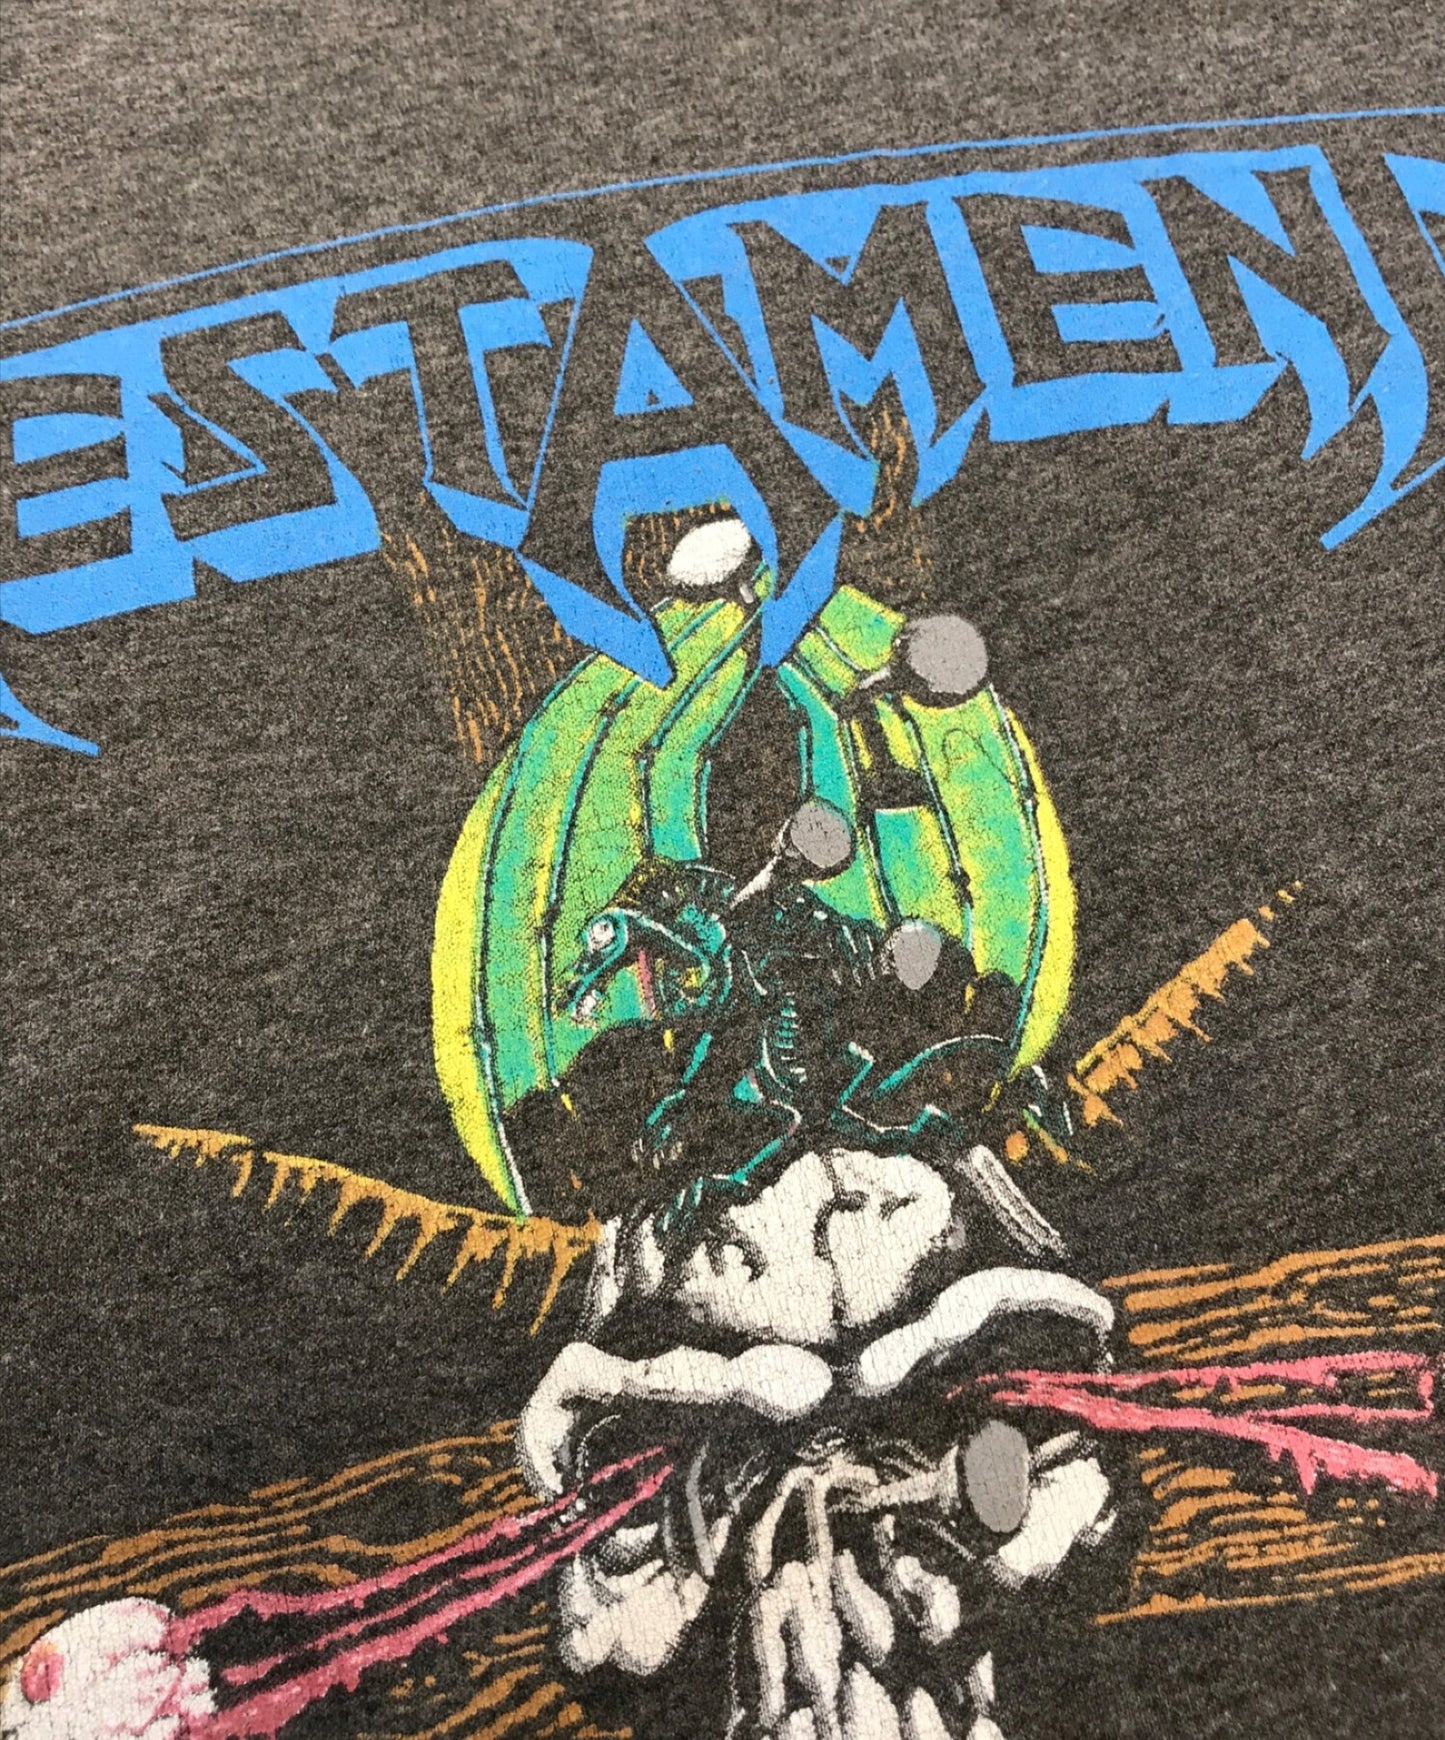 [Pre-owned] TESTAMENT Band T-shirt